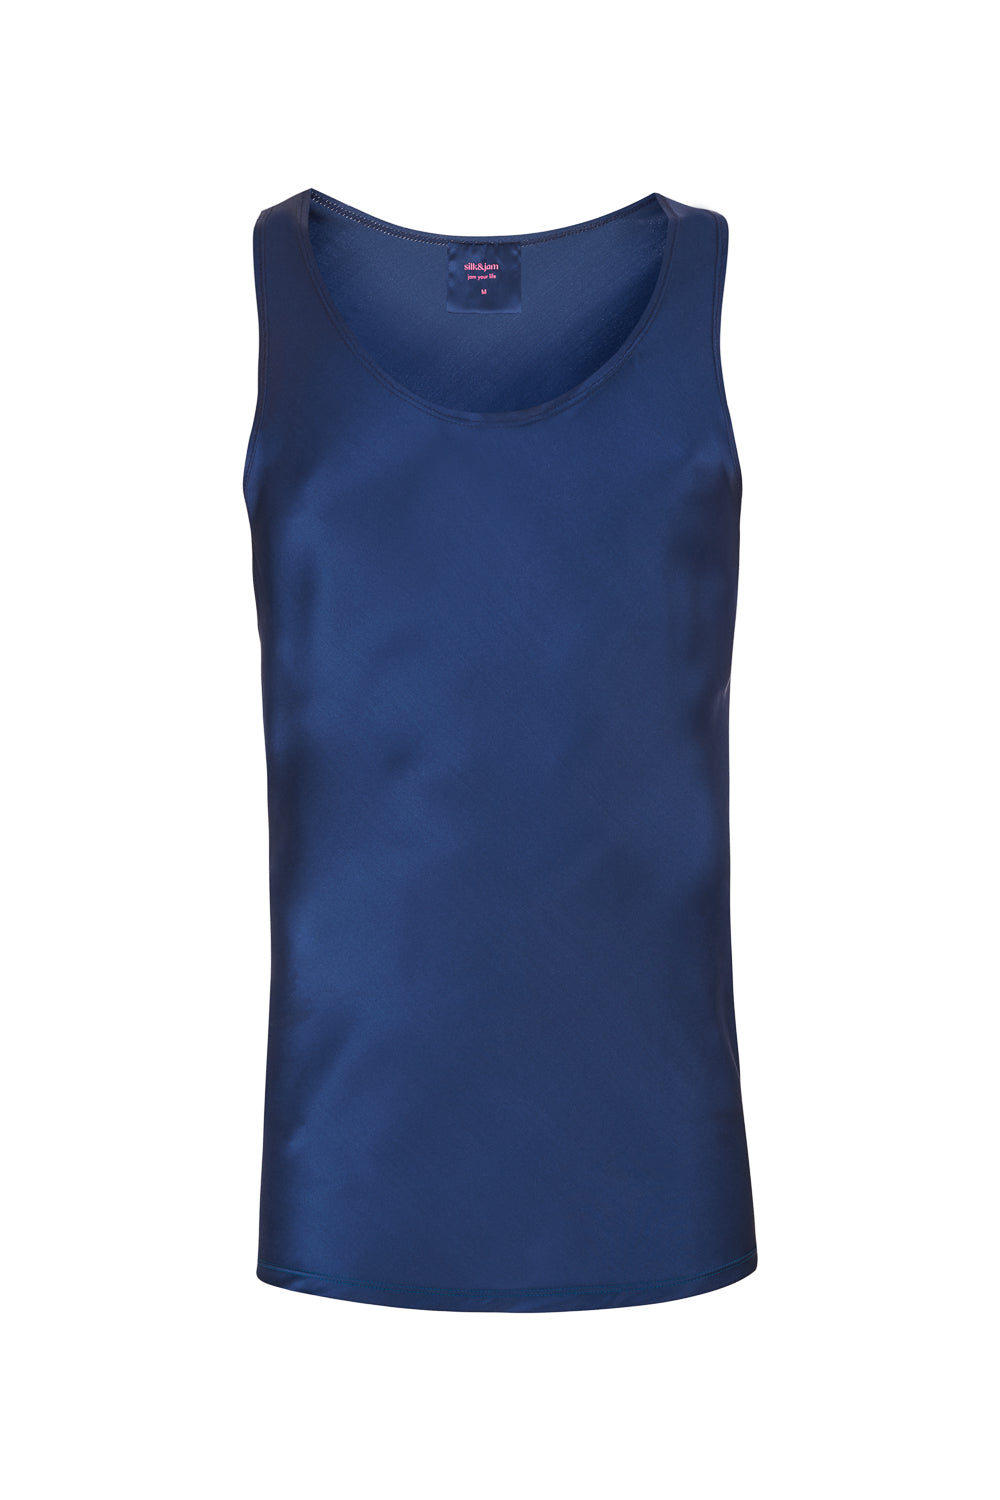 Silk Tank Top For Him in Navy Blue